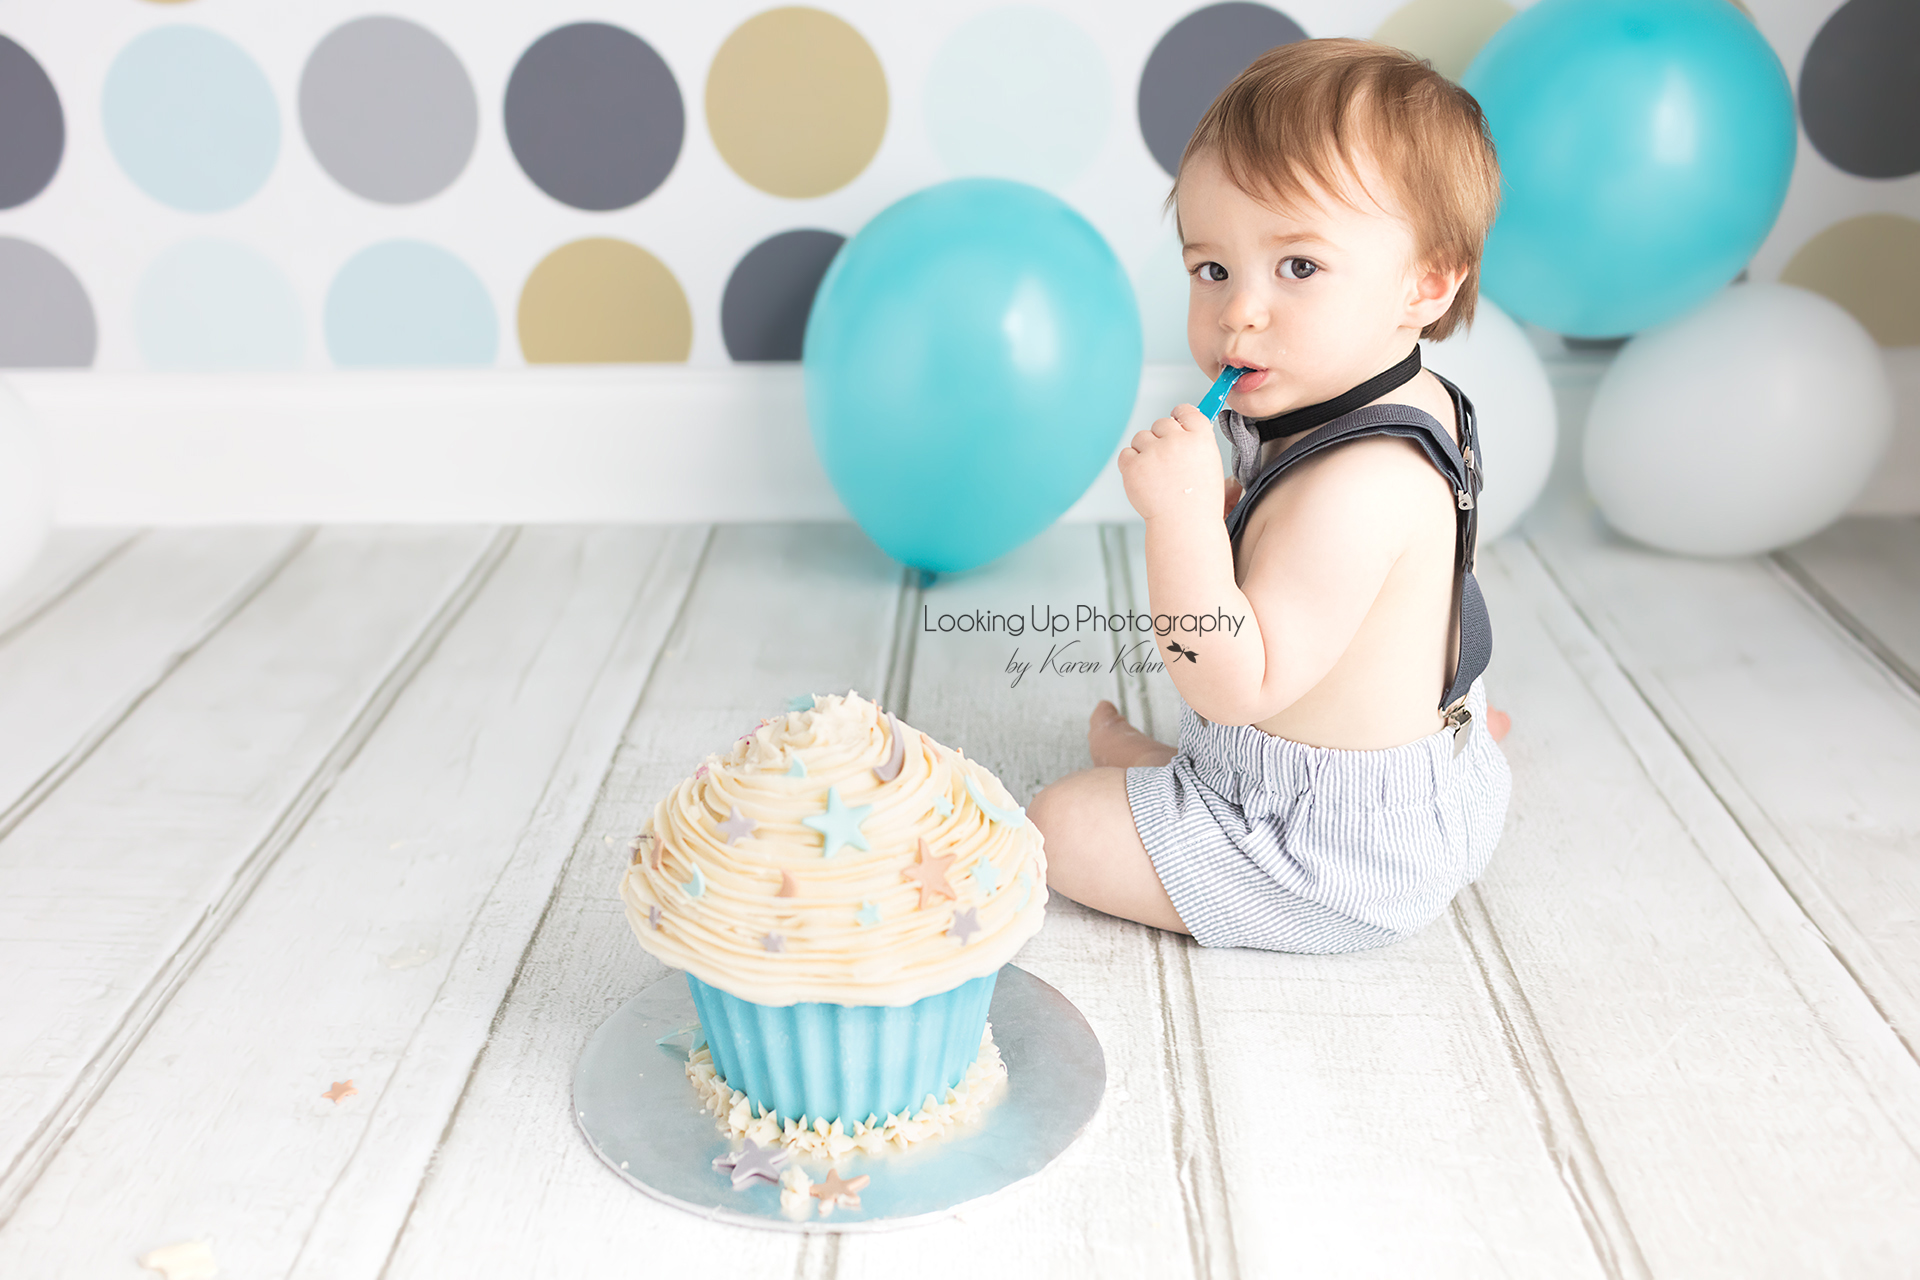 12 month old baby boy donning bow tie and suspenders eating cake in stylish blues and grays and polka dots for cake smash session 1 year milestone portrait